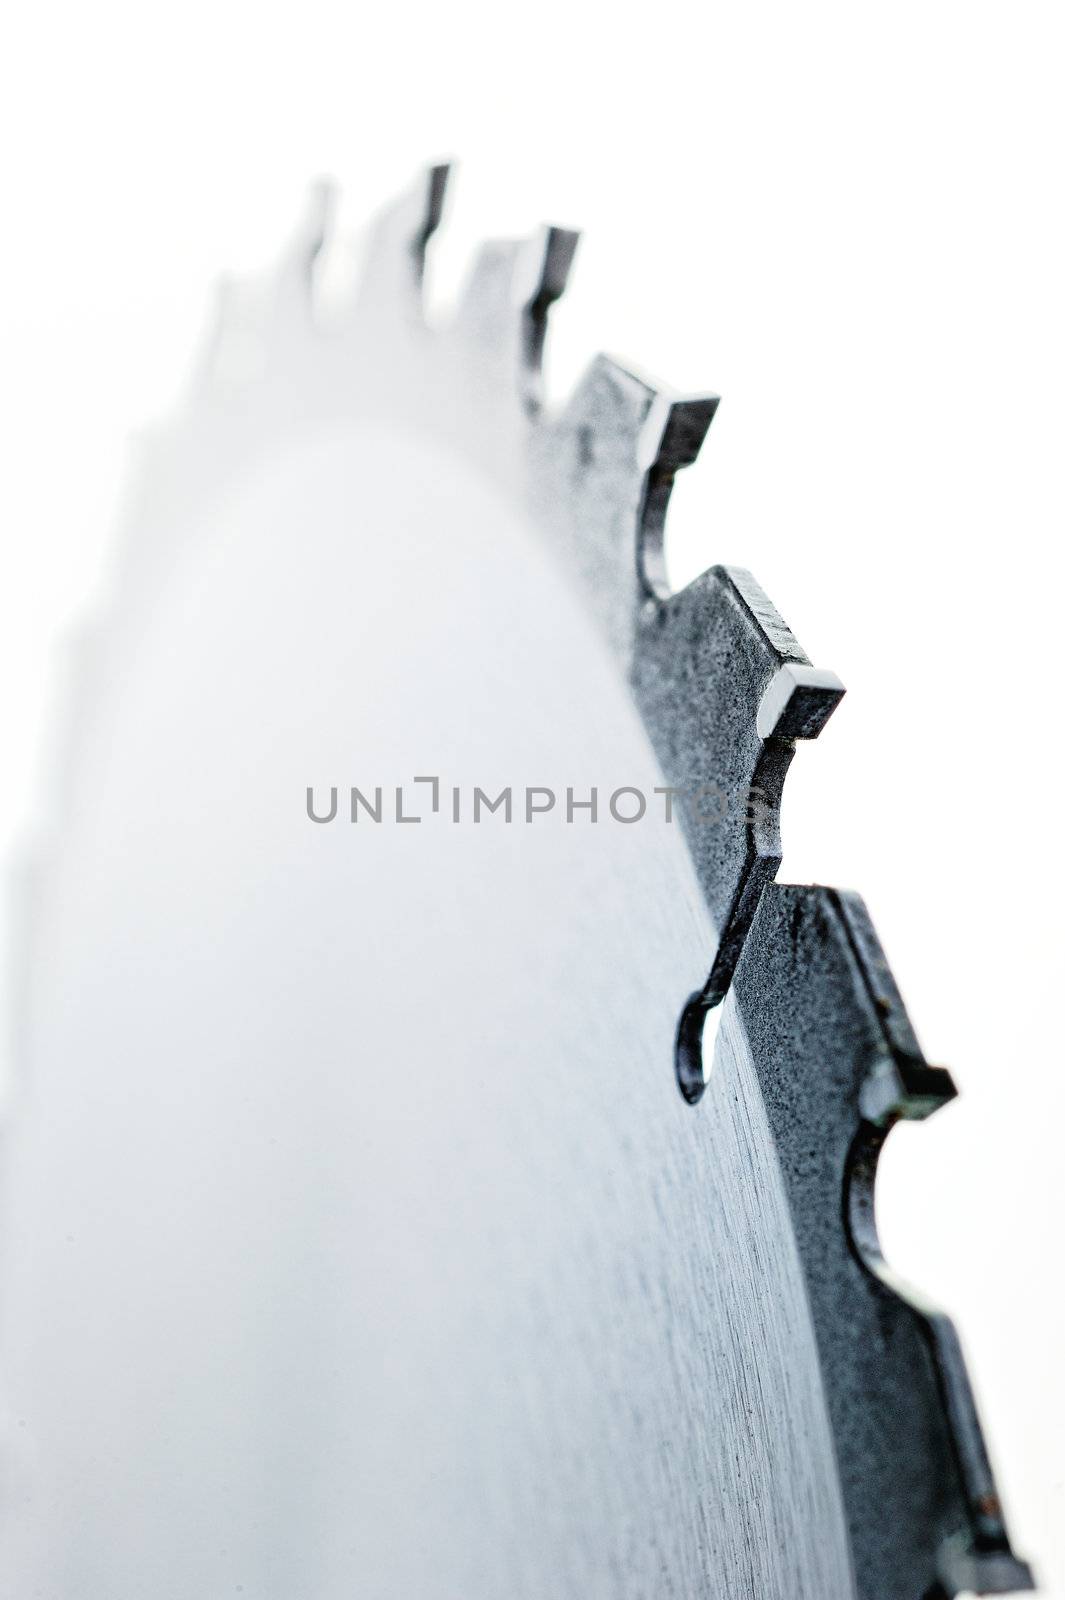 Circular saw blade isolated over a white background